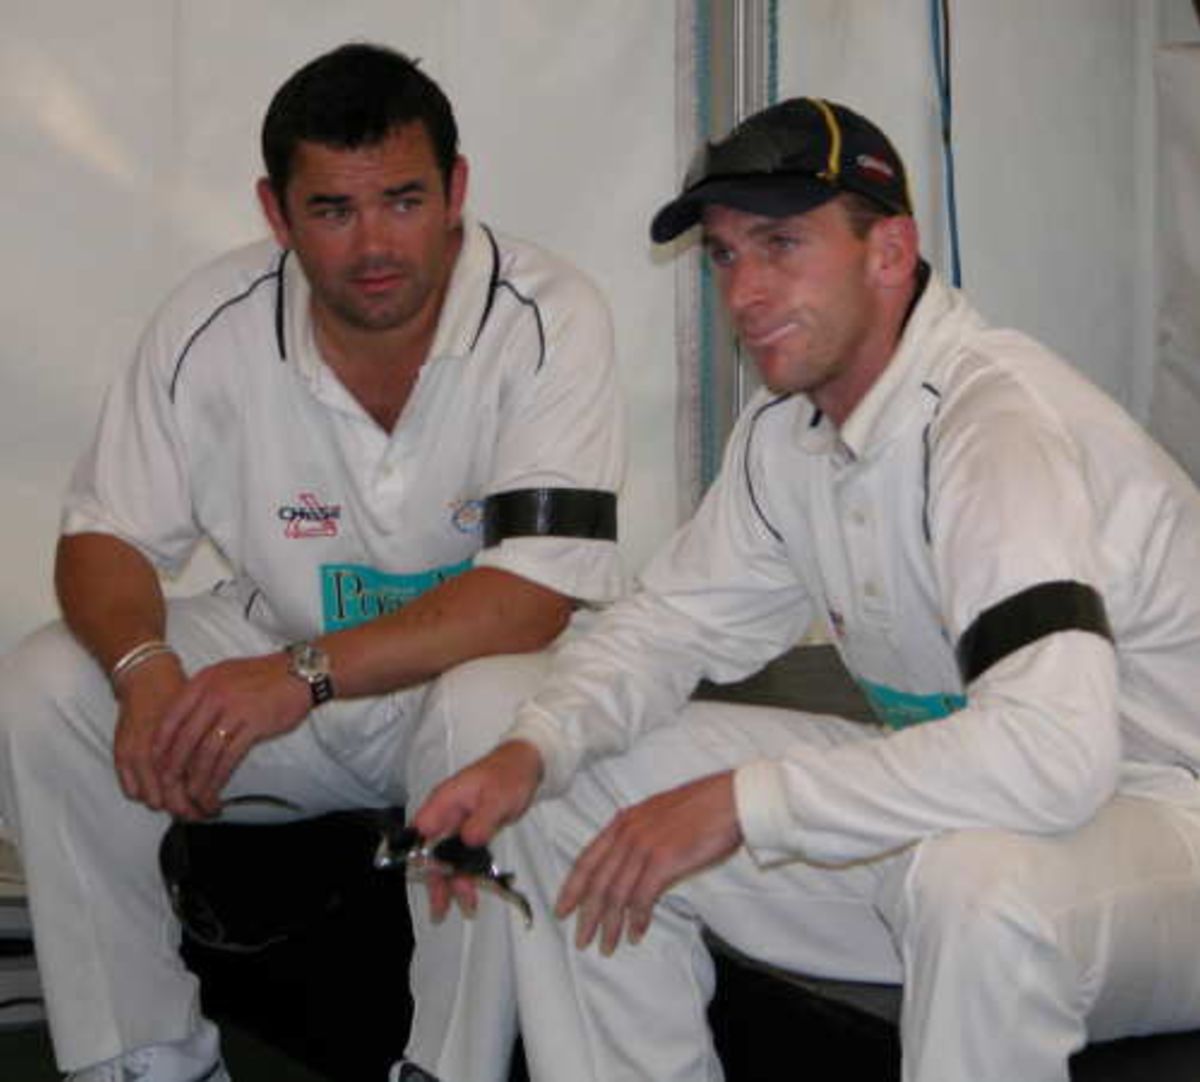 Hampshire captain John Crawley relaxes with former England rugby captain Will Carling